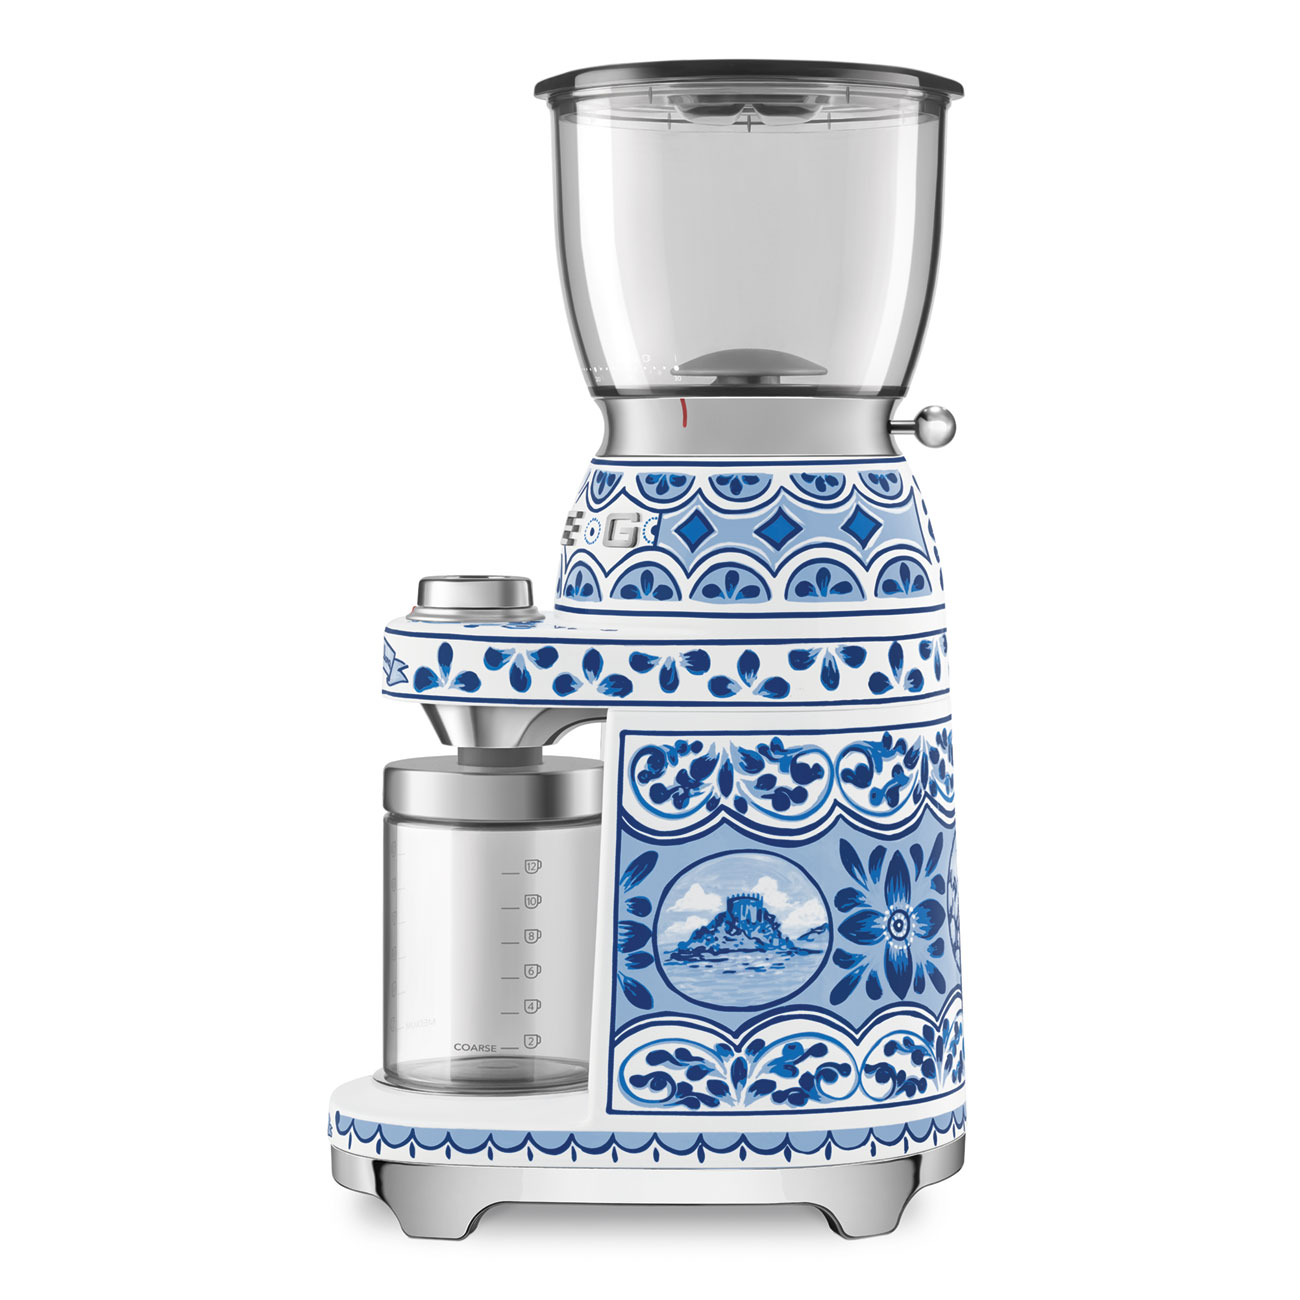 Decorated / Special Coffee Grinder featuring a conical burr - CGF01DGBUK - Smeg_2